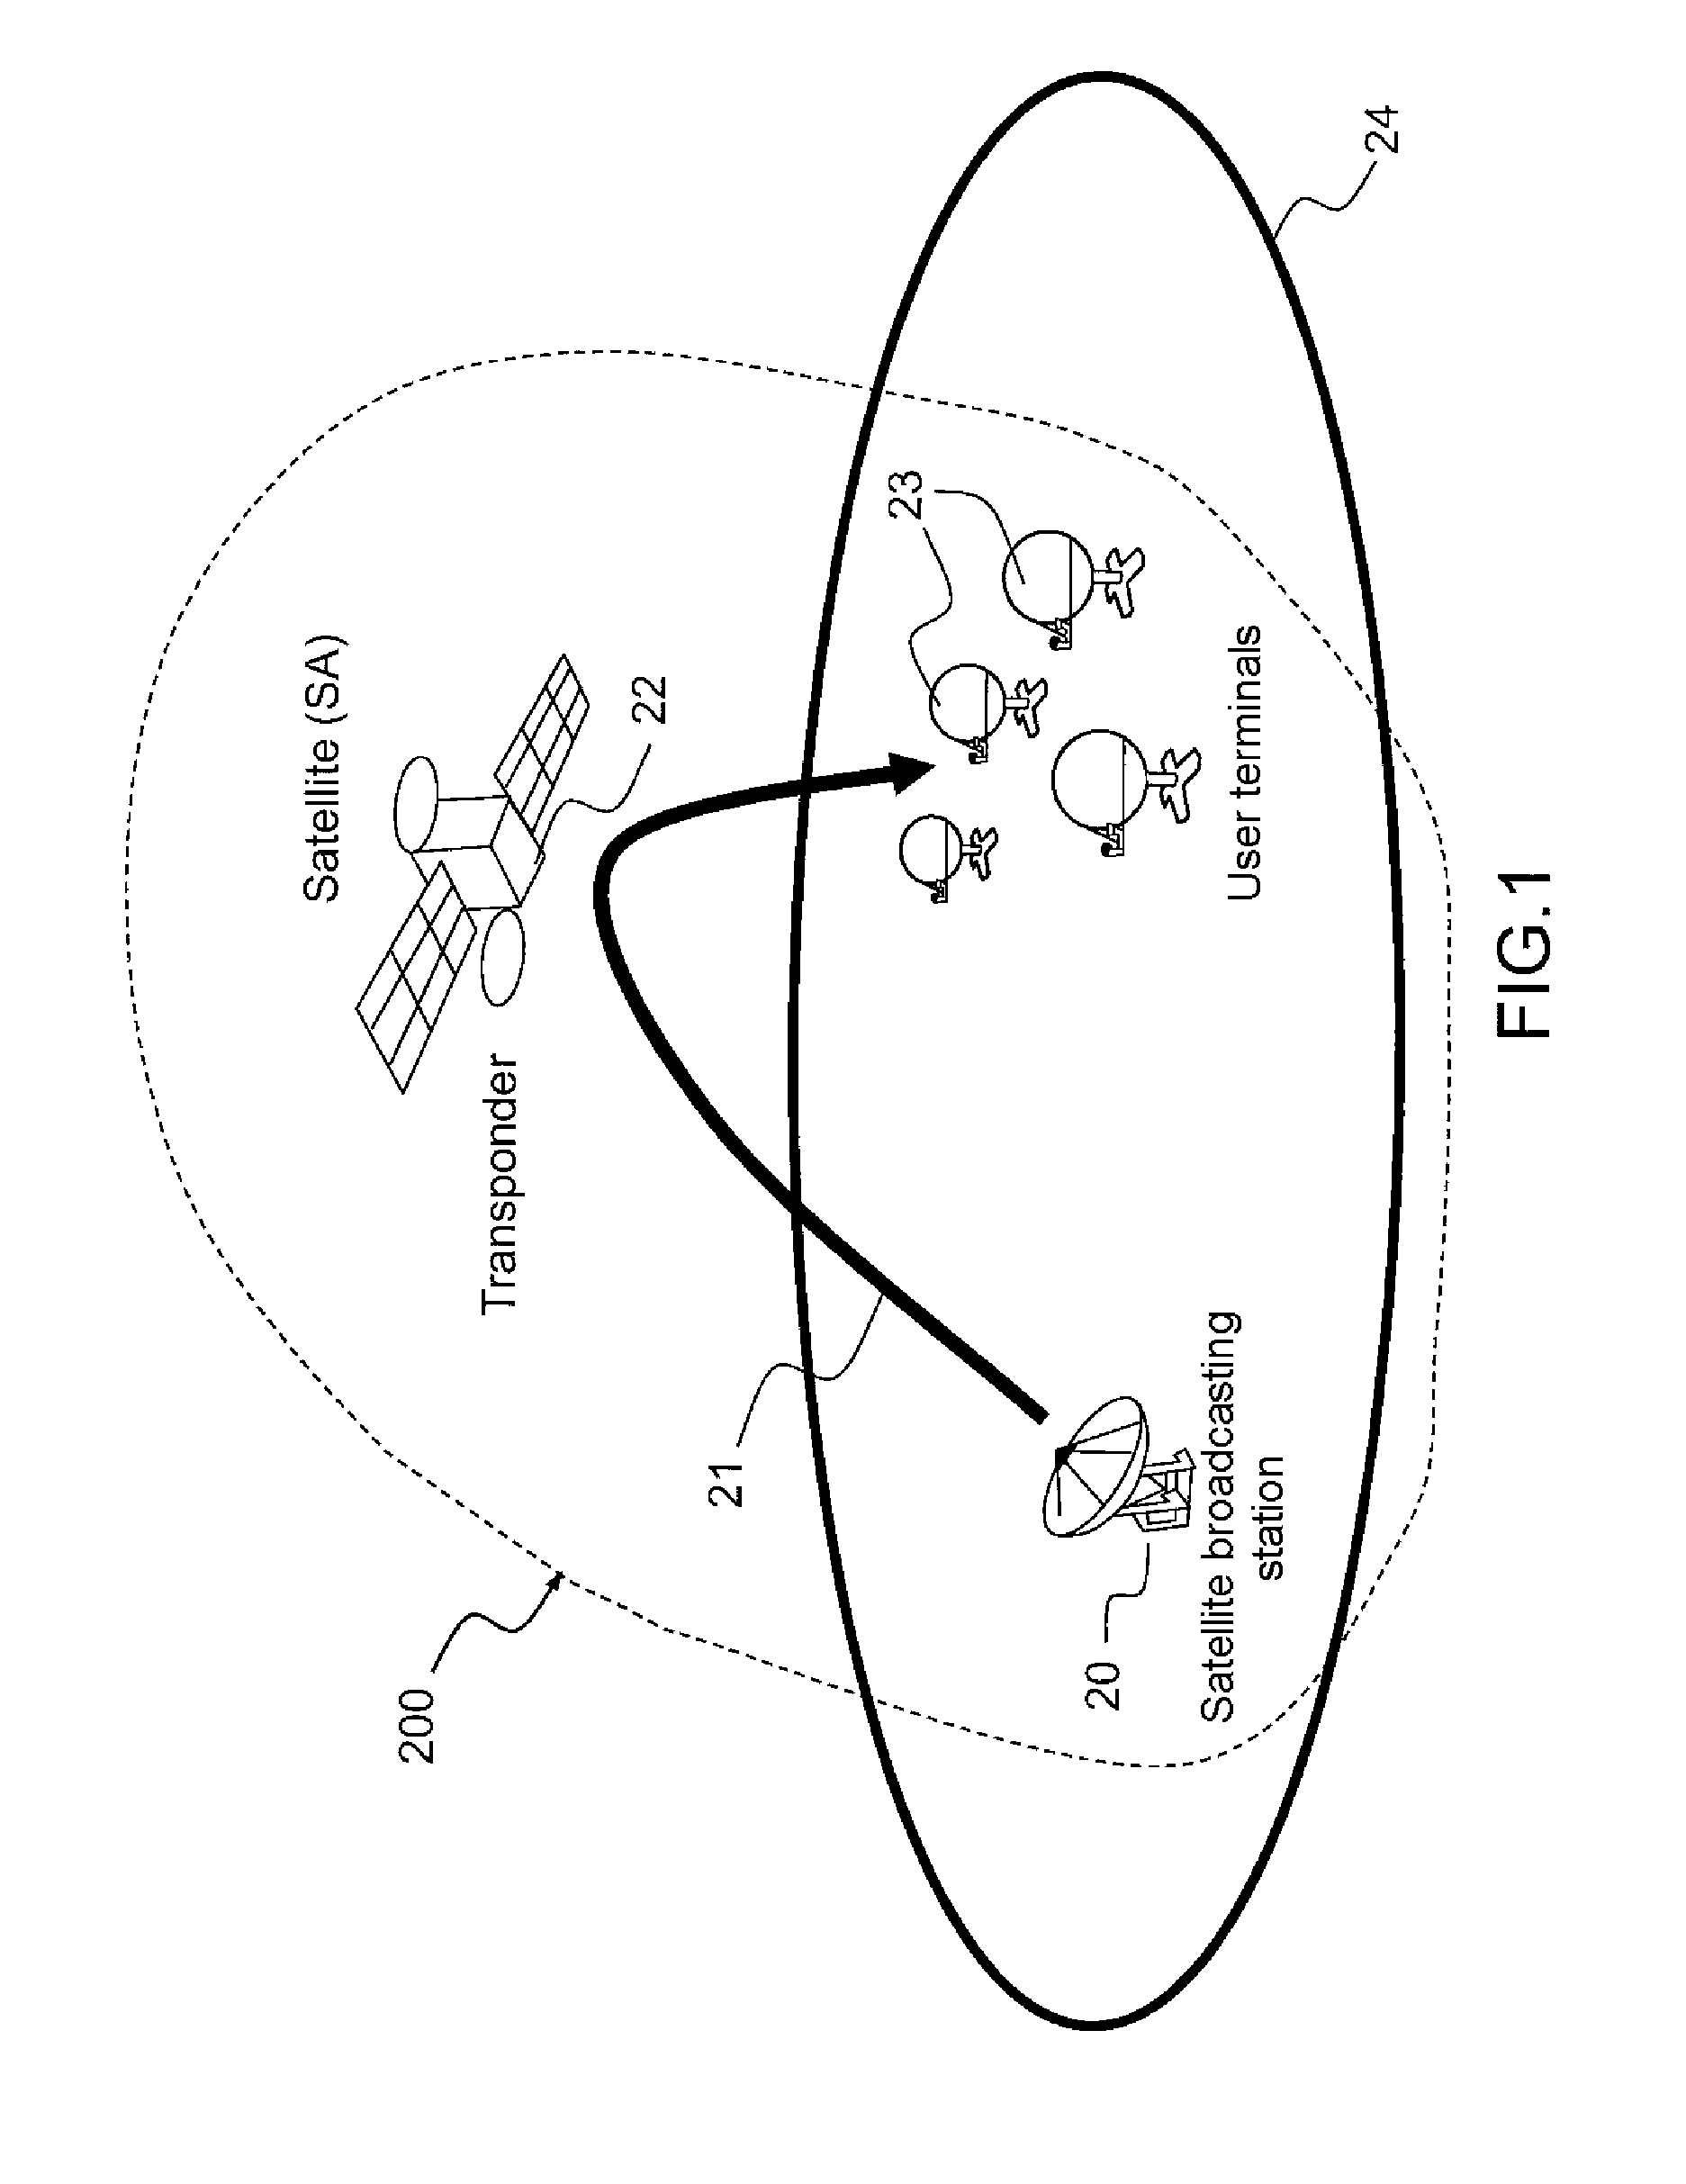 Distributed Distance Measurement System for Locating a Geostationary Satellite